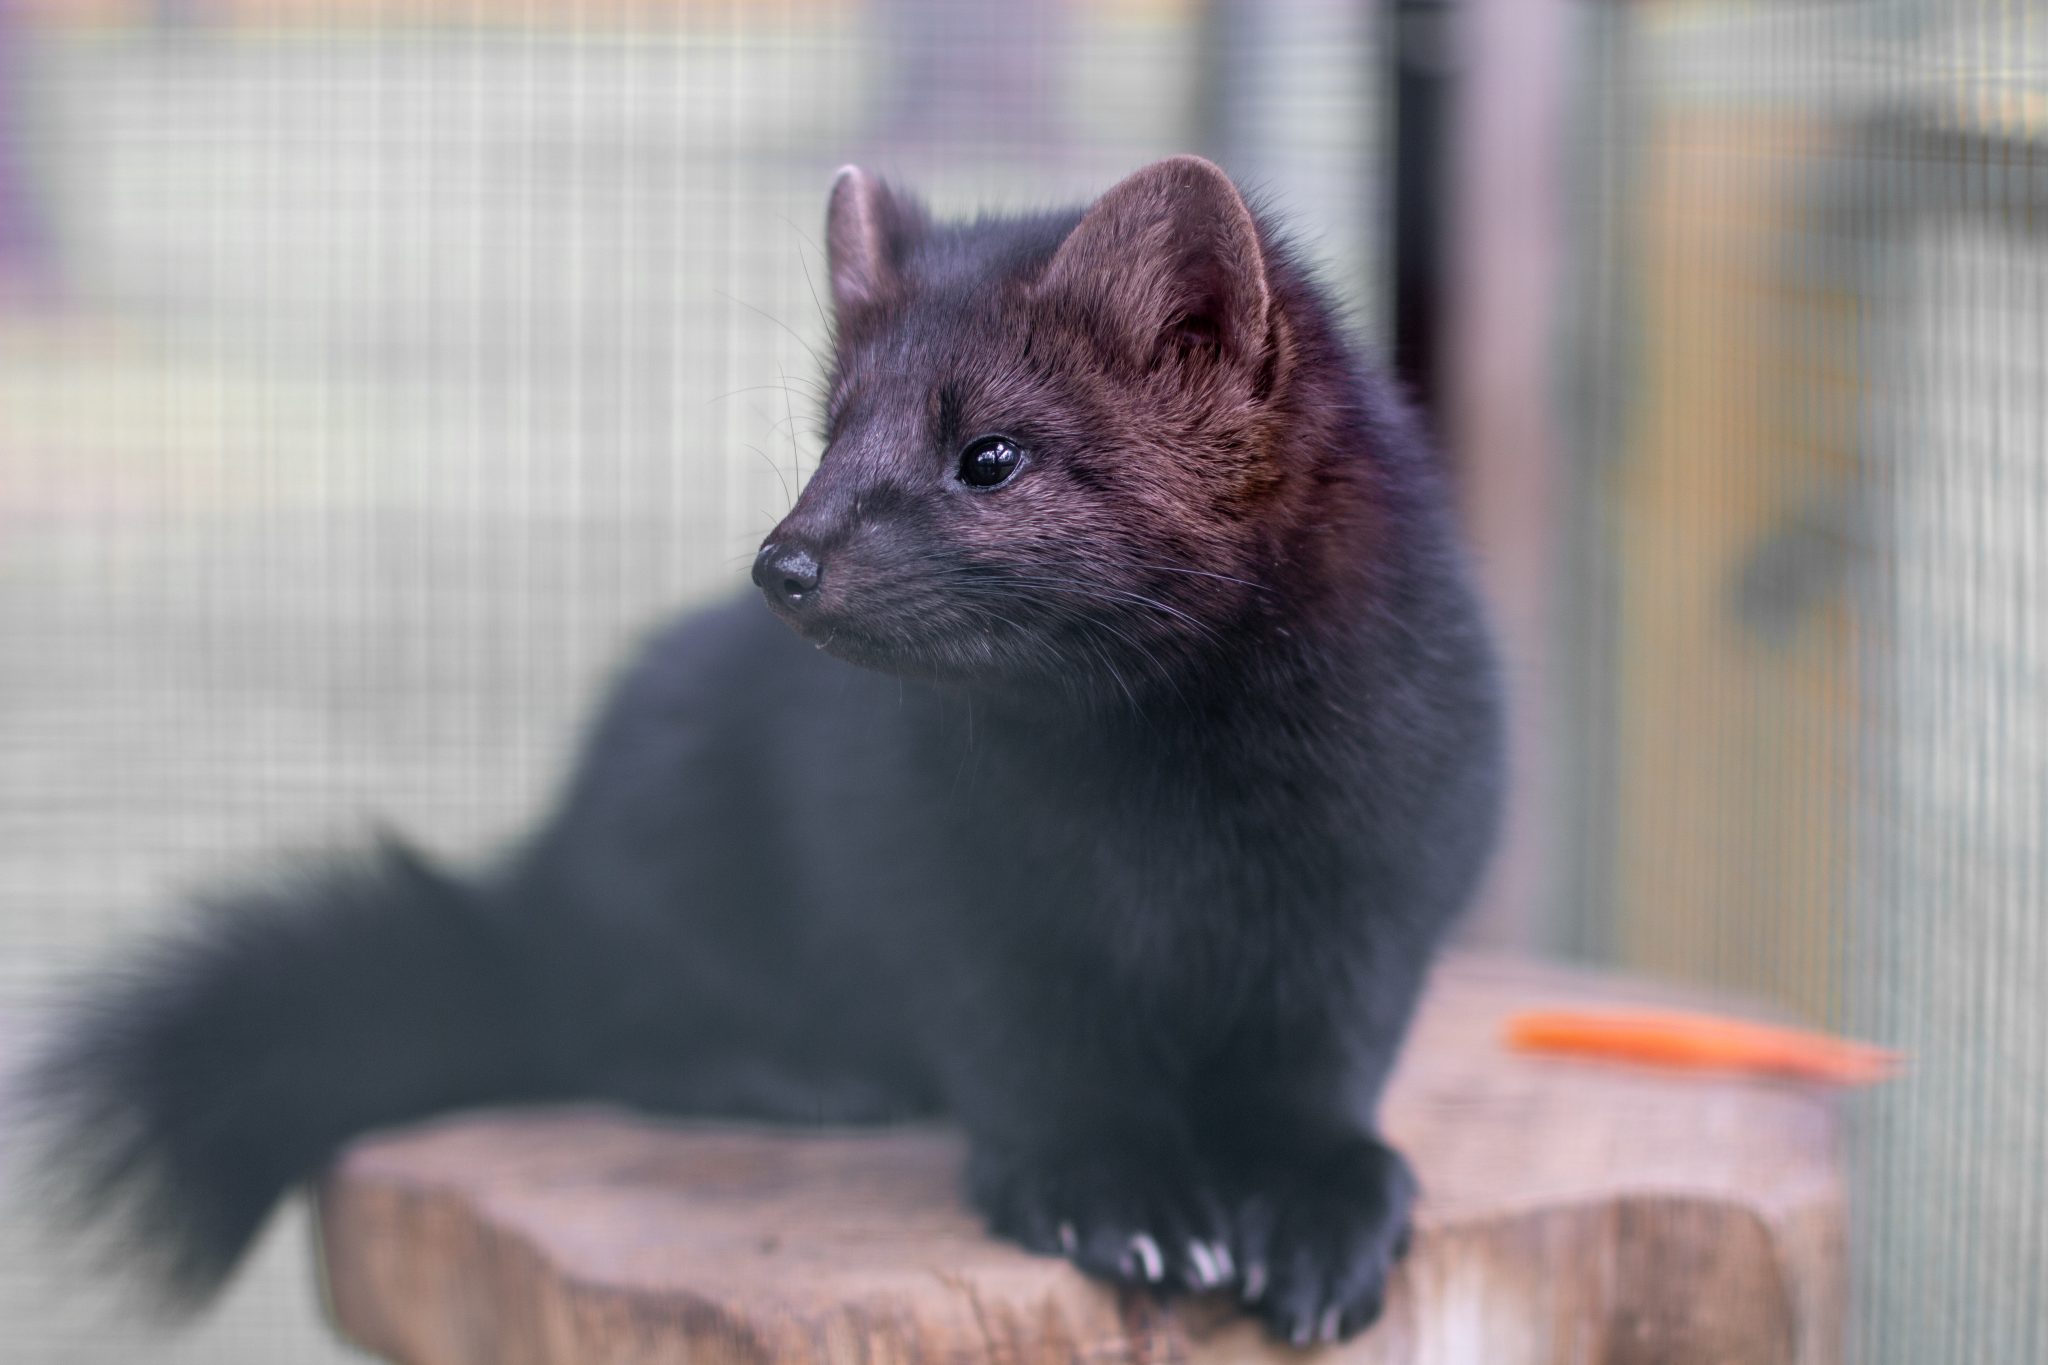 Hungary becomes the latest country to ban mink and fox fur farming